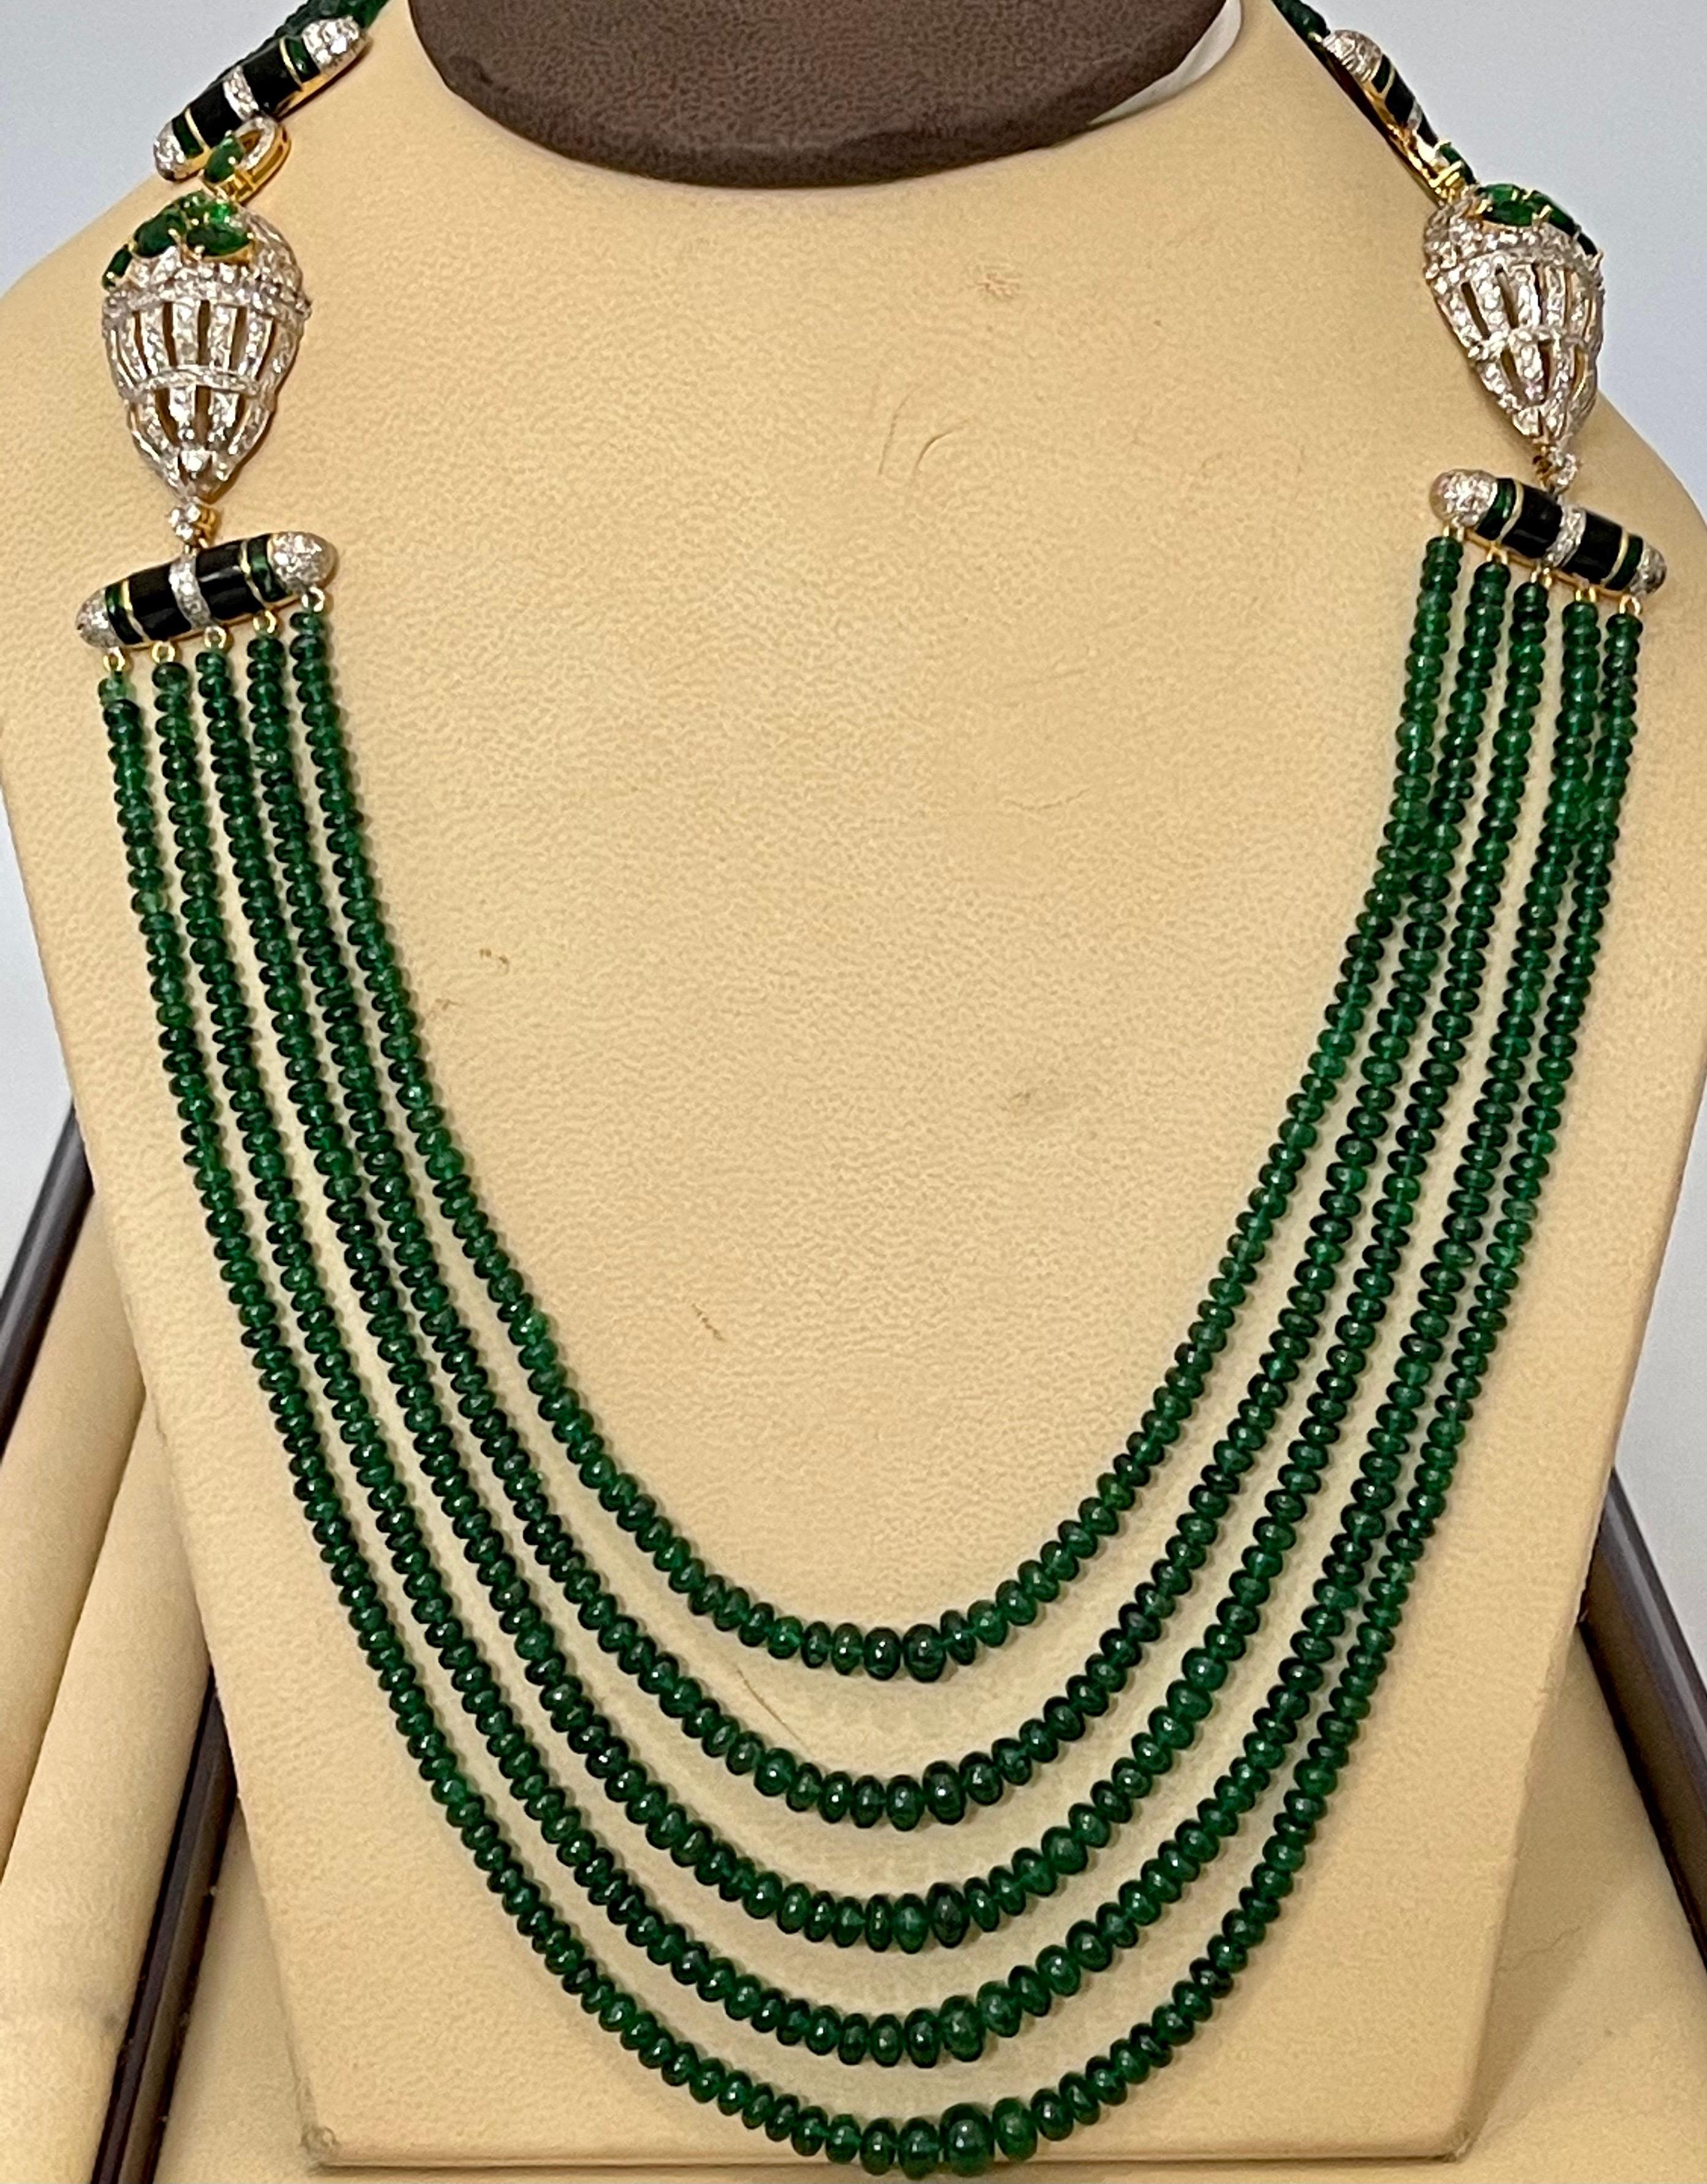 335 Carat 5-Strand Emerald Necklace with 6.5 Carat Diamond & Enamel in 14k Gold For Sale 3